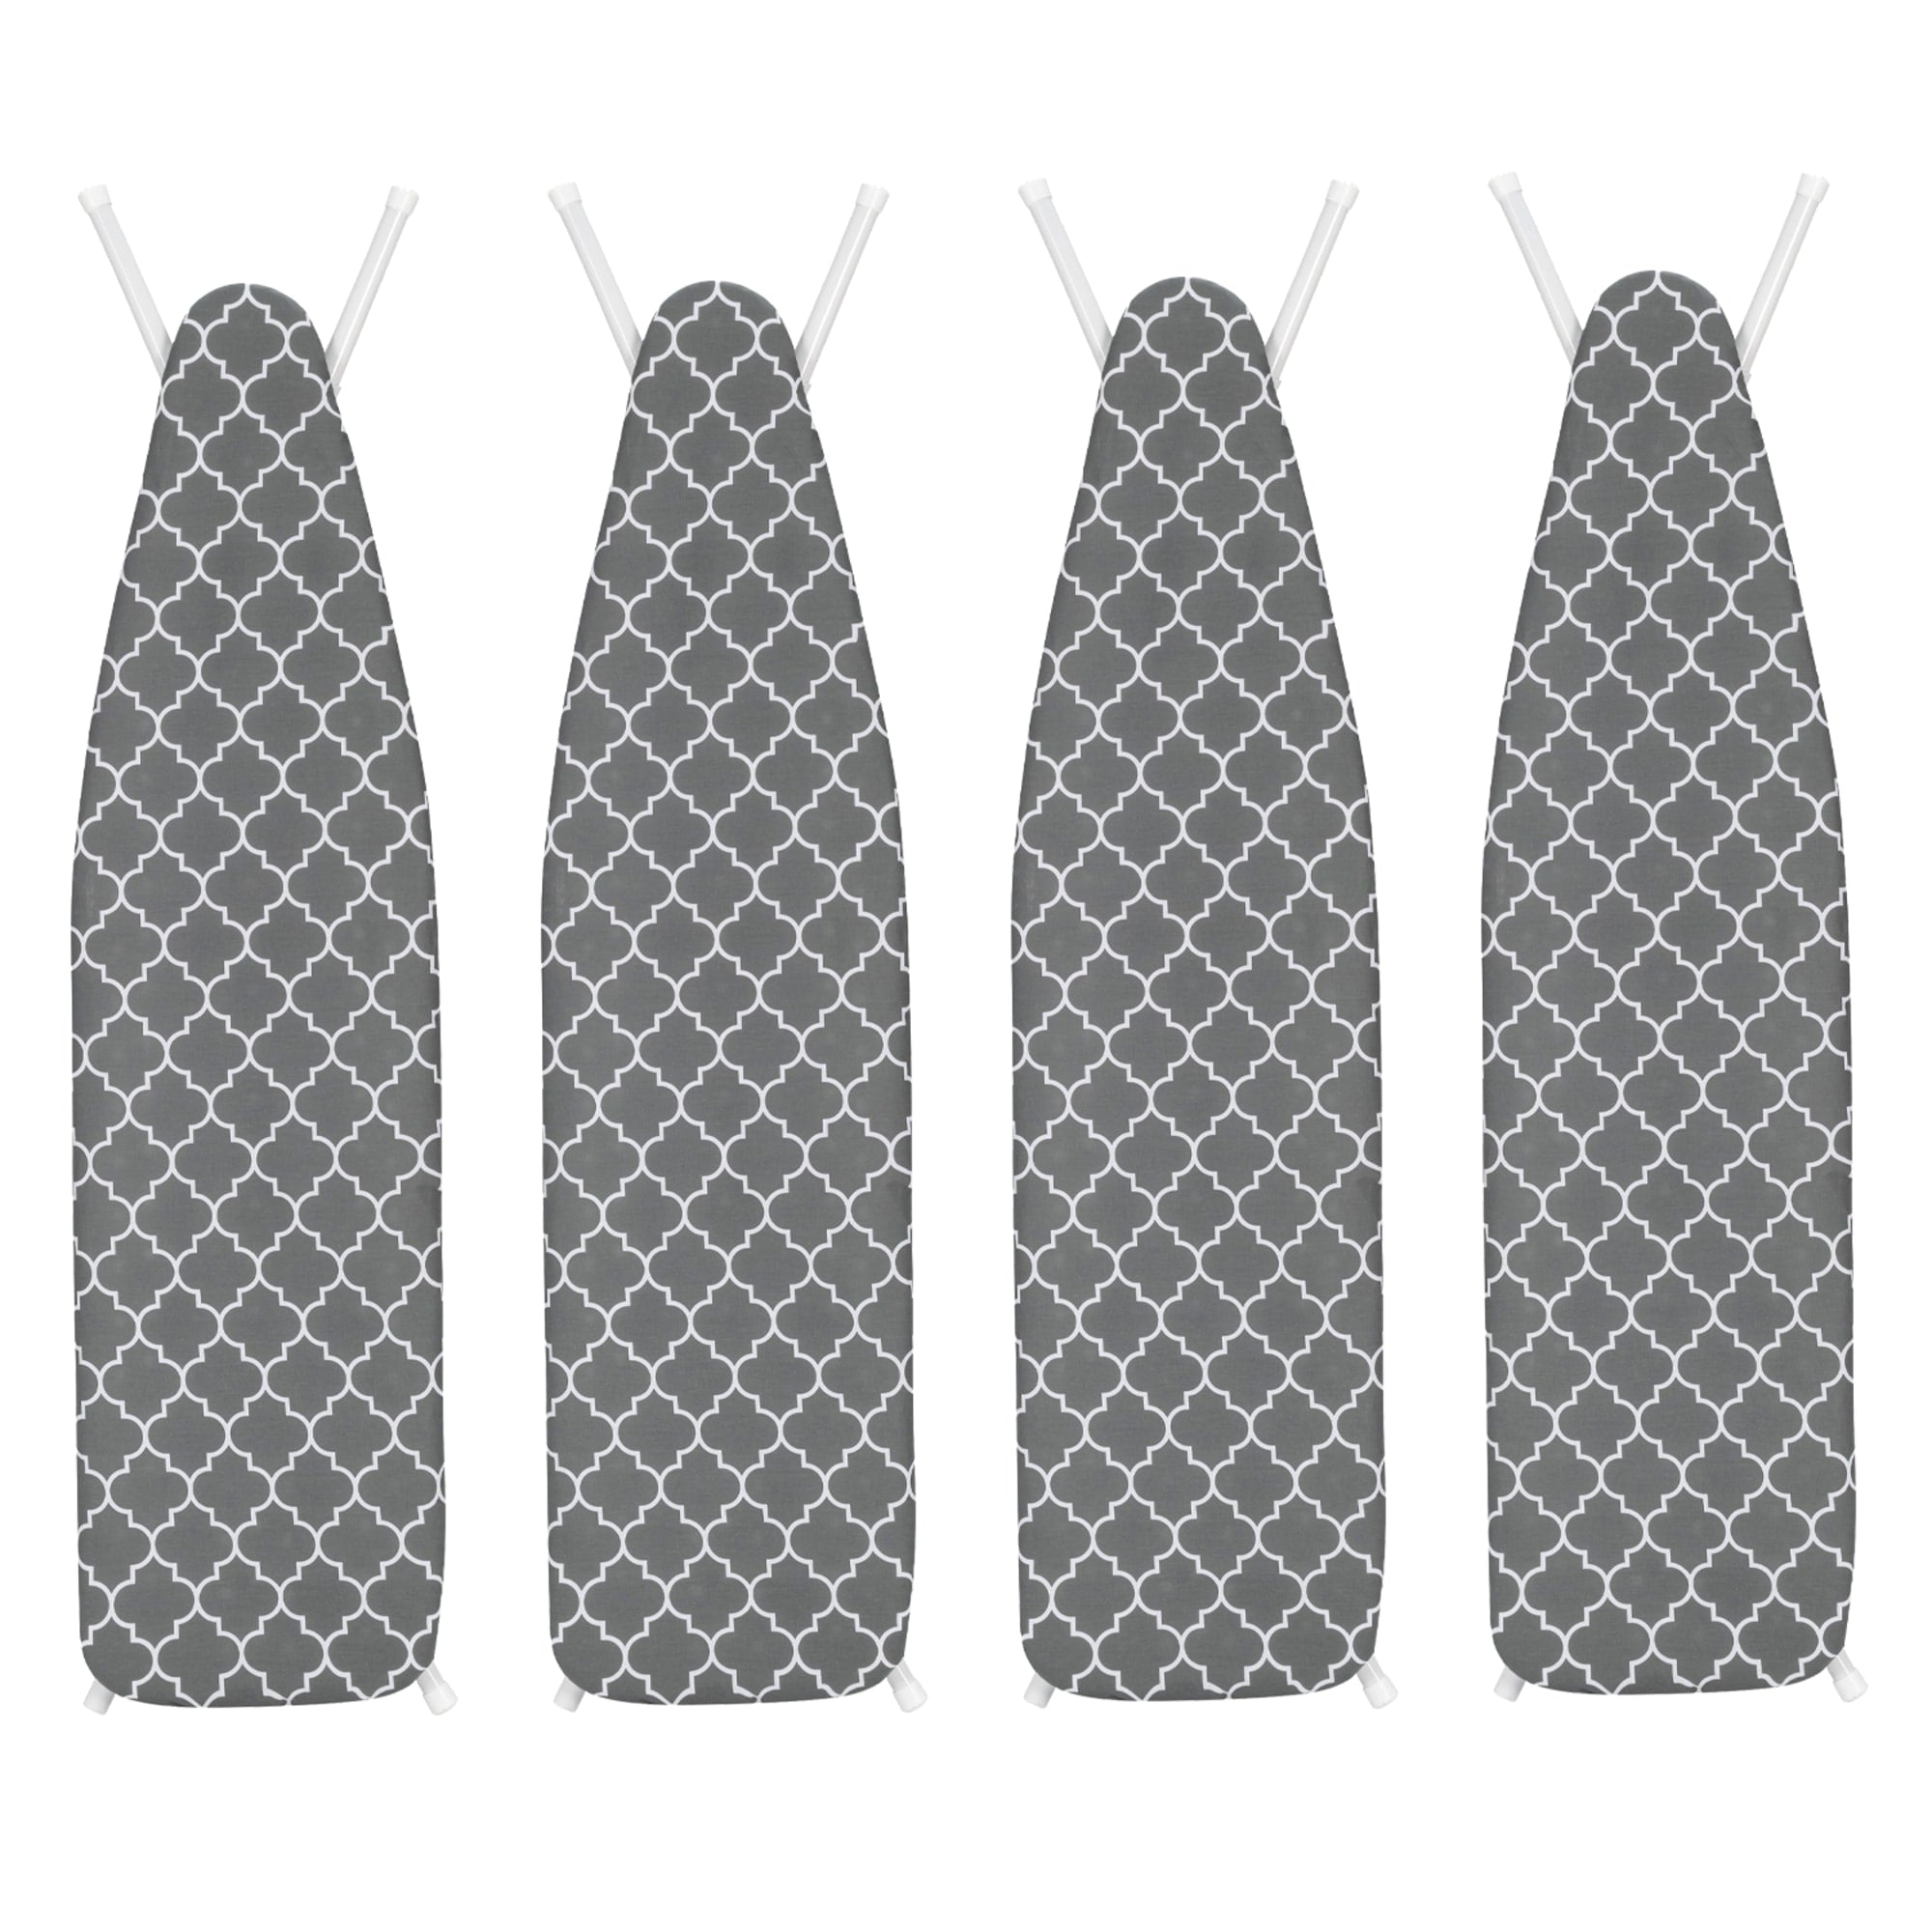 Seymour Home Products Adjustable Height, 4-Leg Ironing Board With Perforated Top, Gray Lattice (4 Pack) $30.00 EACH, CASE PACK OF 4